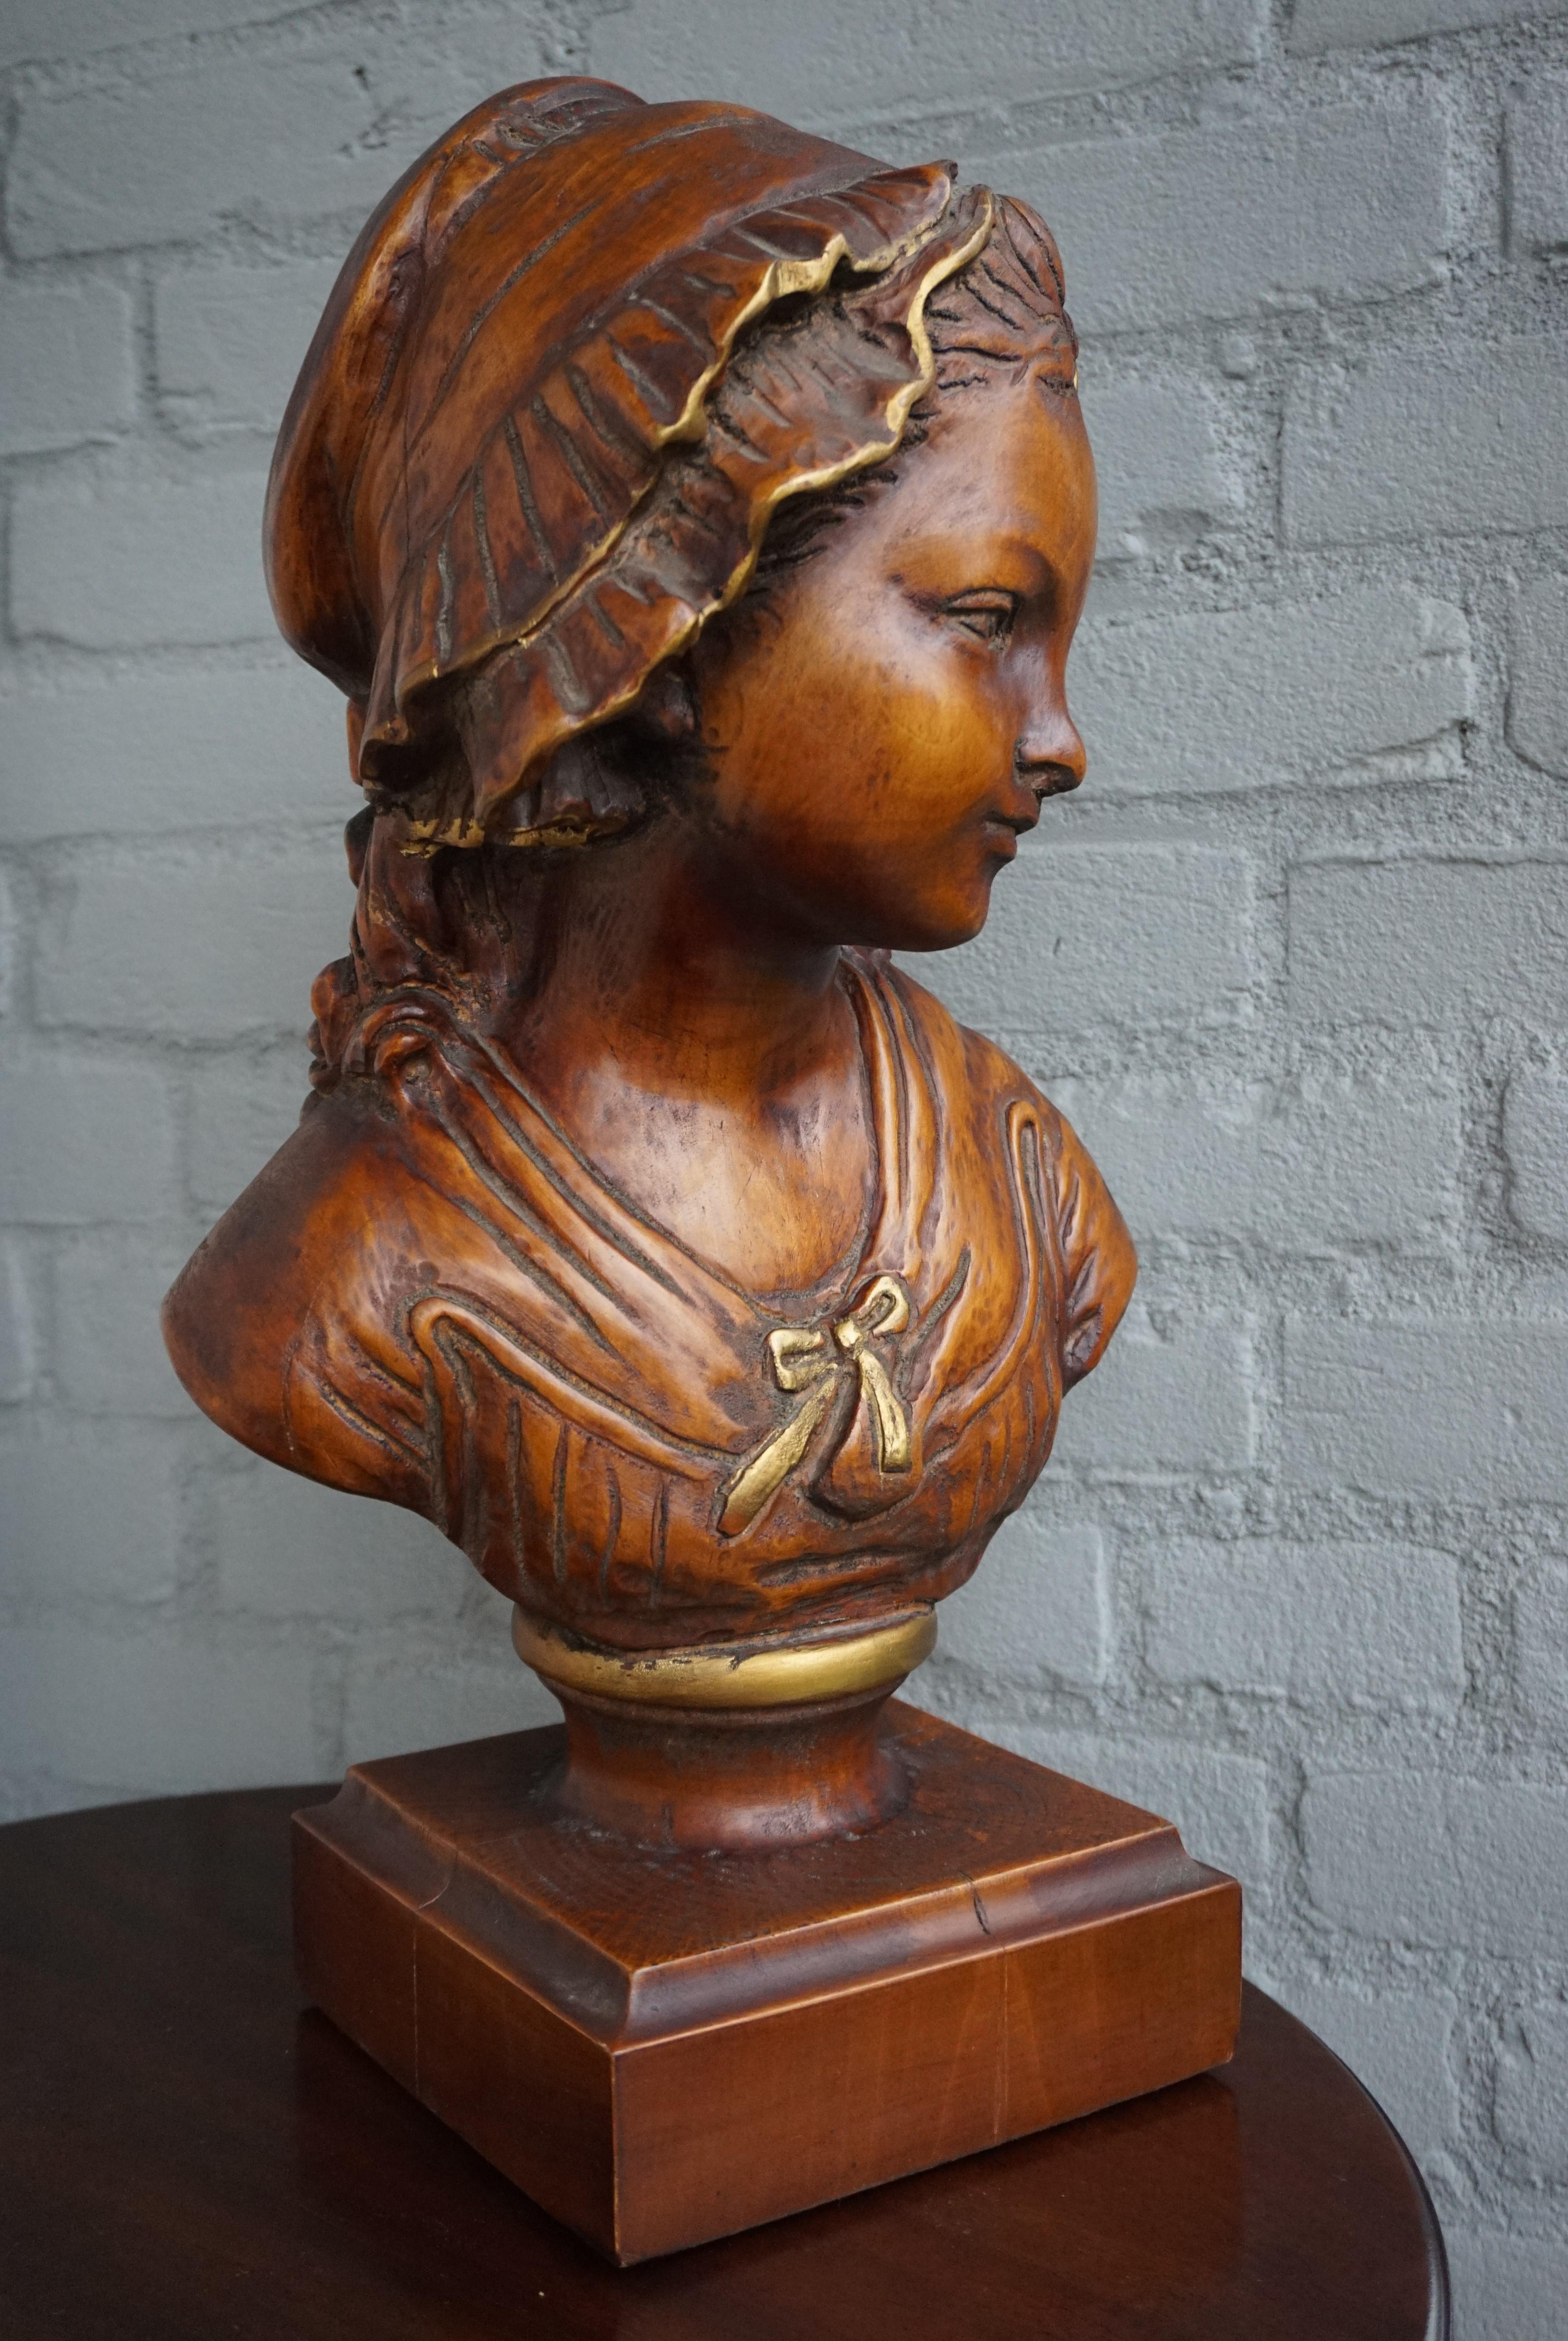 Beautifully hand carved antique wooden sculpture.

The sculptor who created this rare and exceptional young girl bust, in our view, perfectly captured her innocence and fragility. The artists of days gone by keep surprising us with the quality and